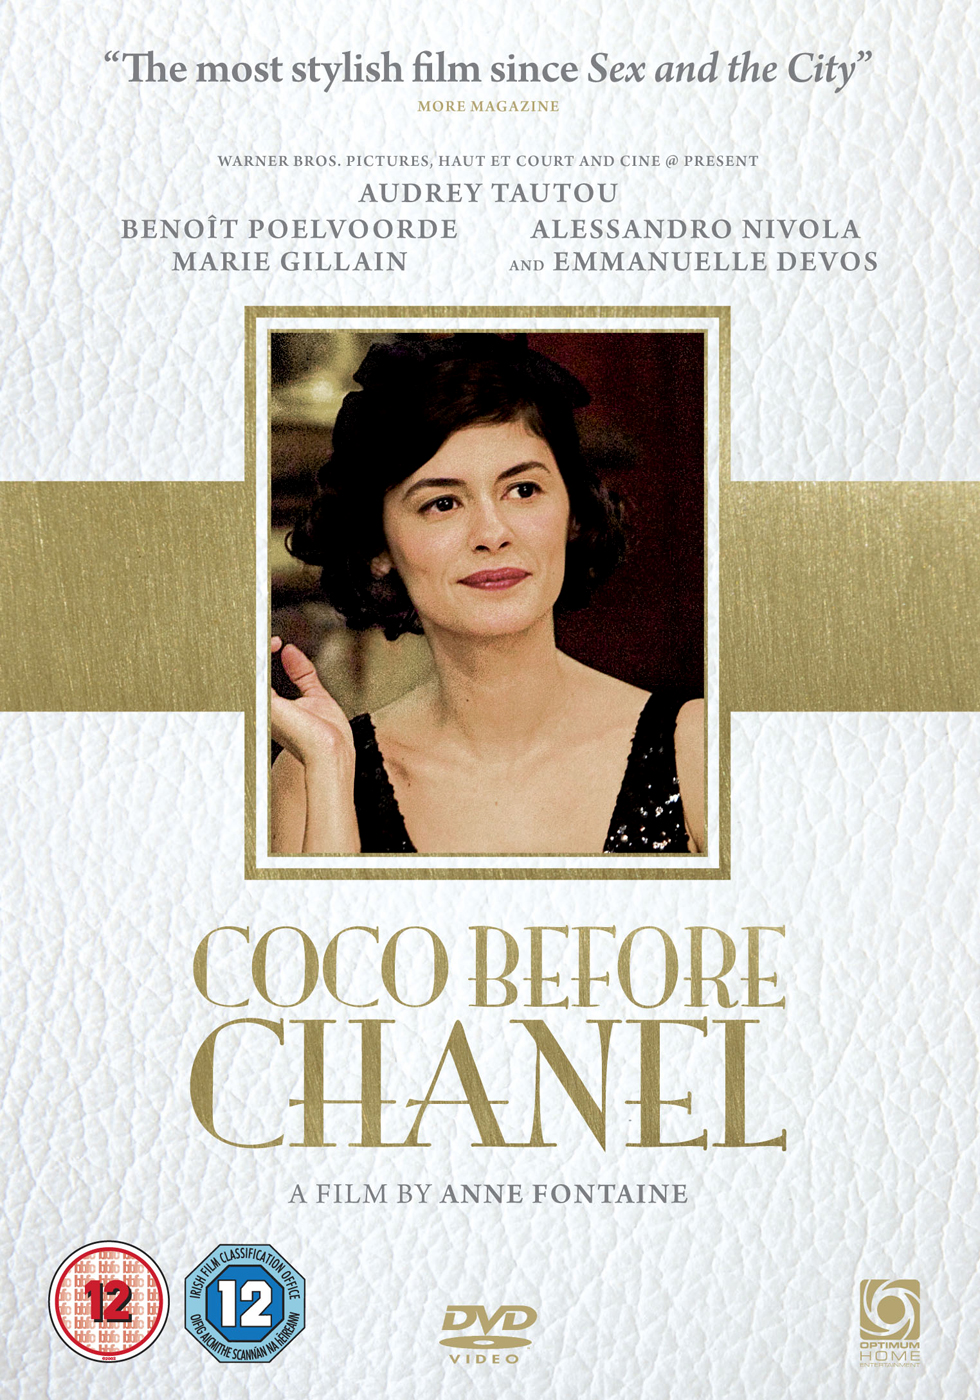 Coco Before Chanel (DVD, 2010, Canadian)